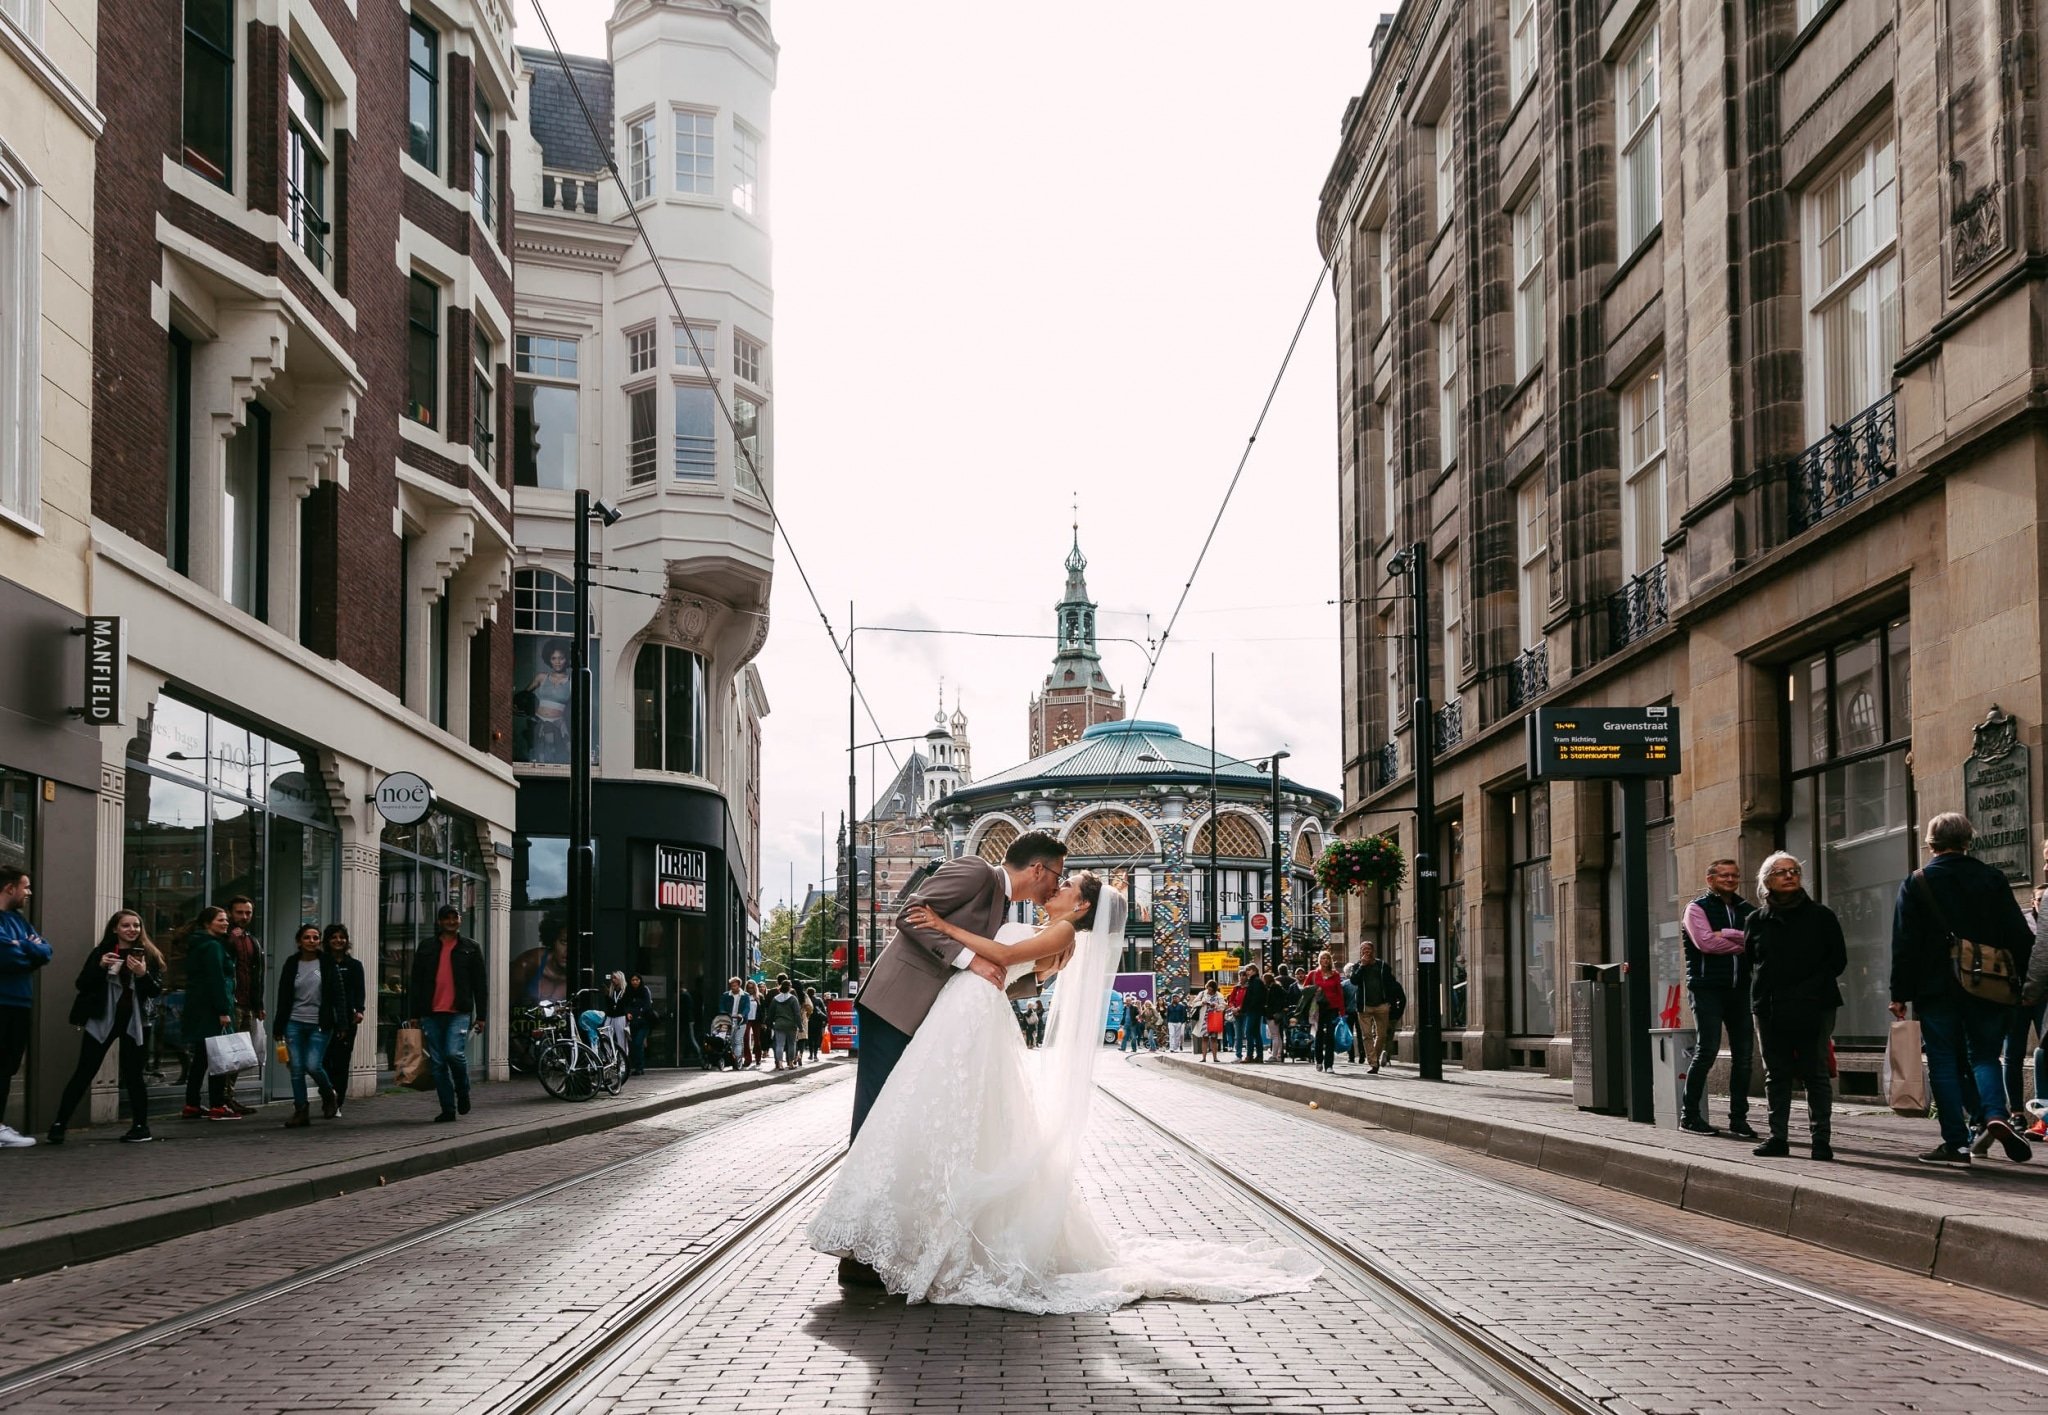 A bride and groom kiss on the street in Amsterdam.